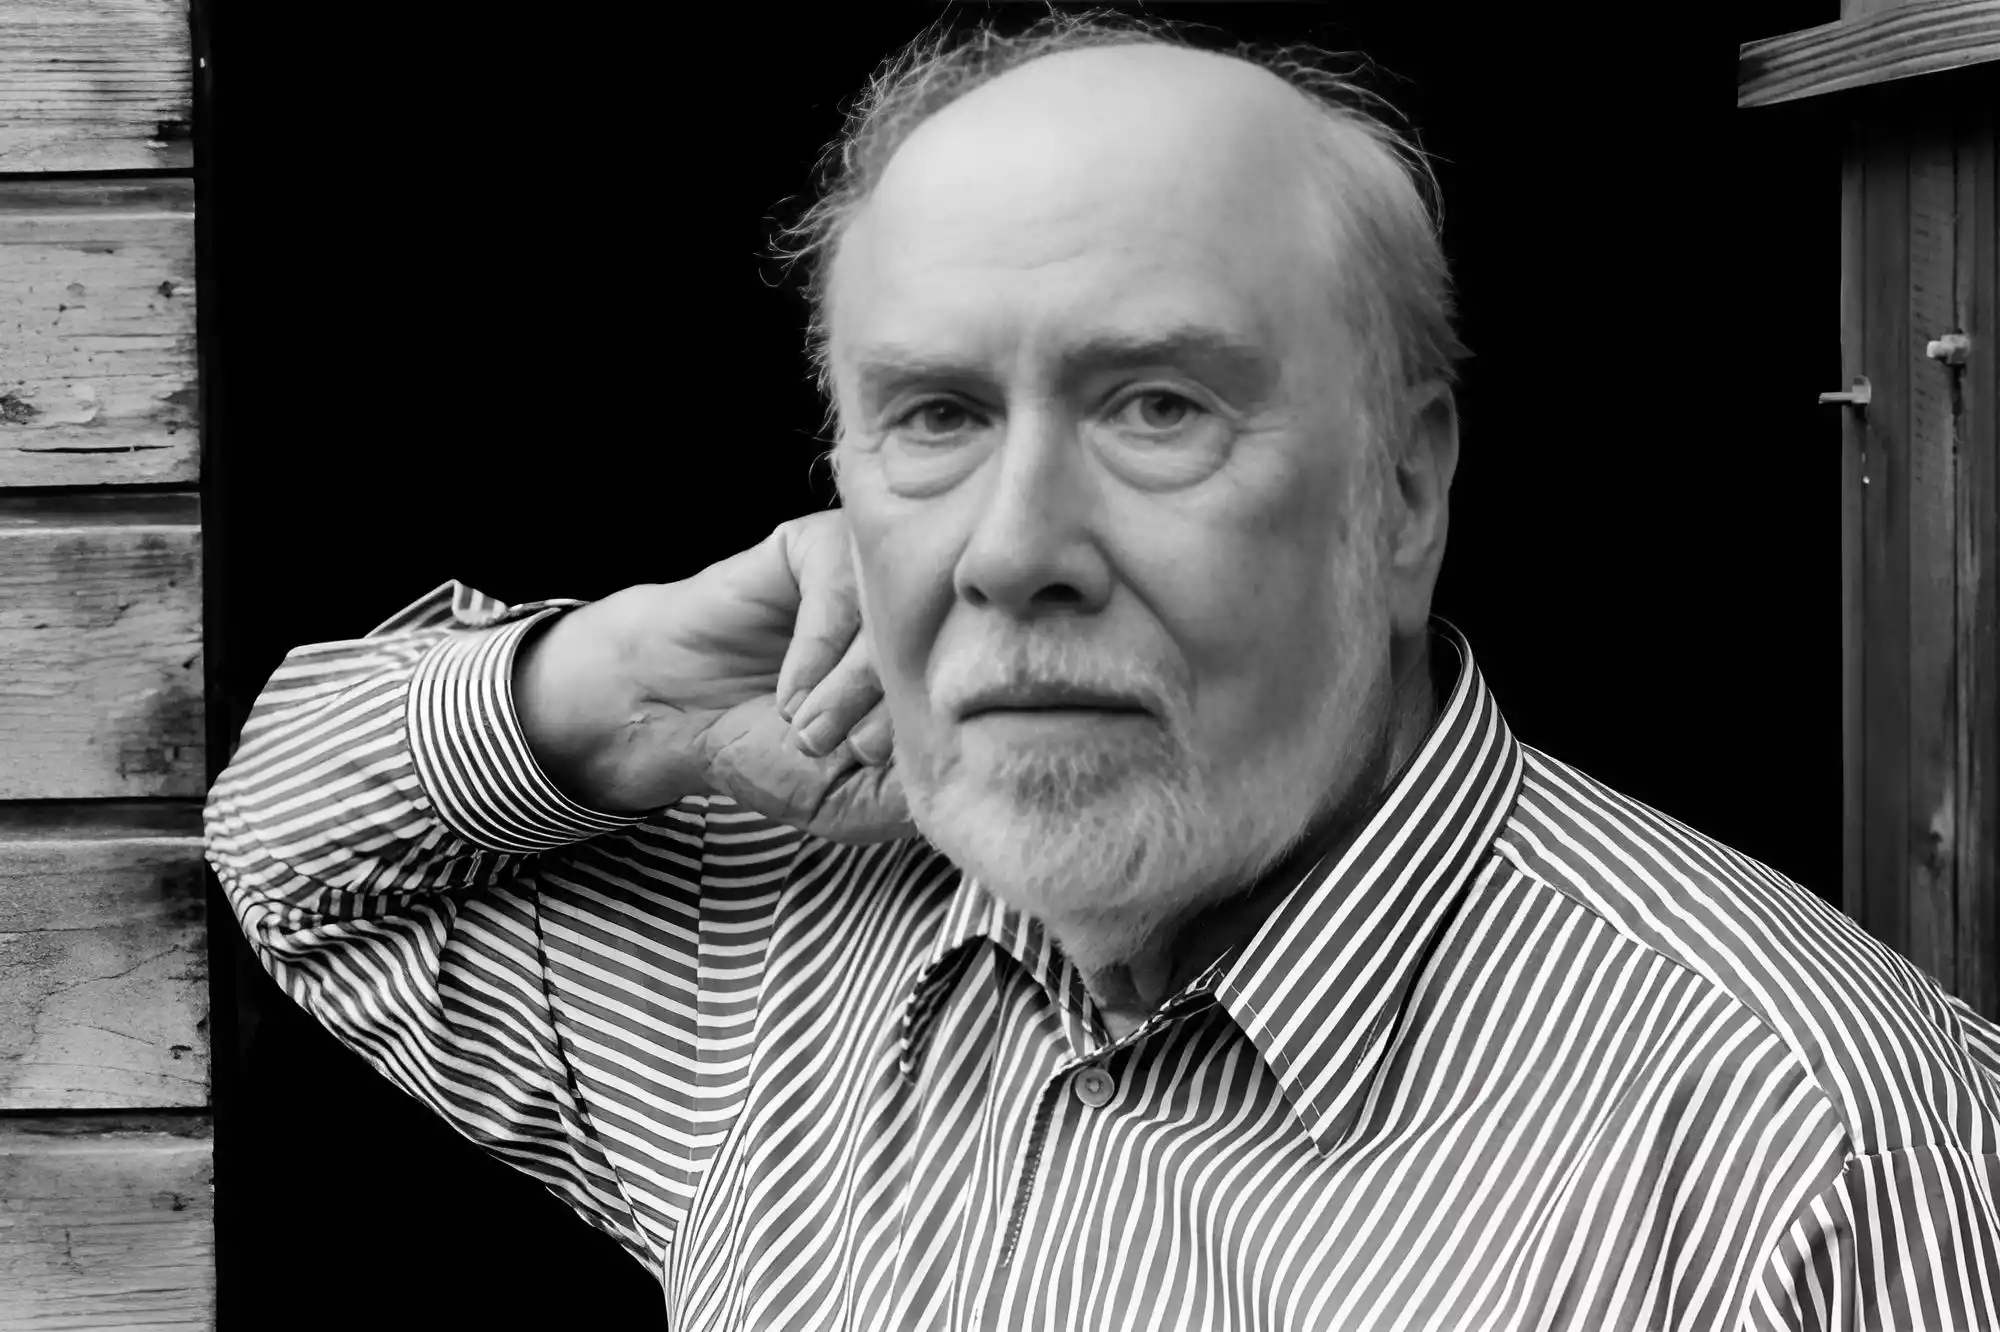 Who is Niklaus Wirth?